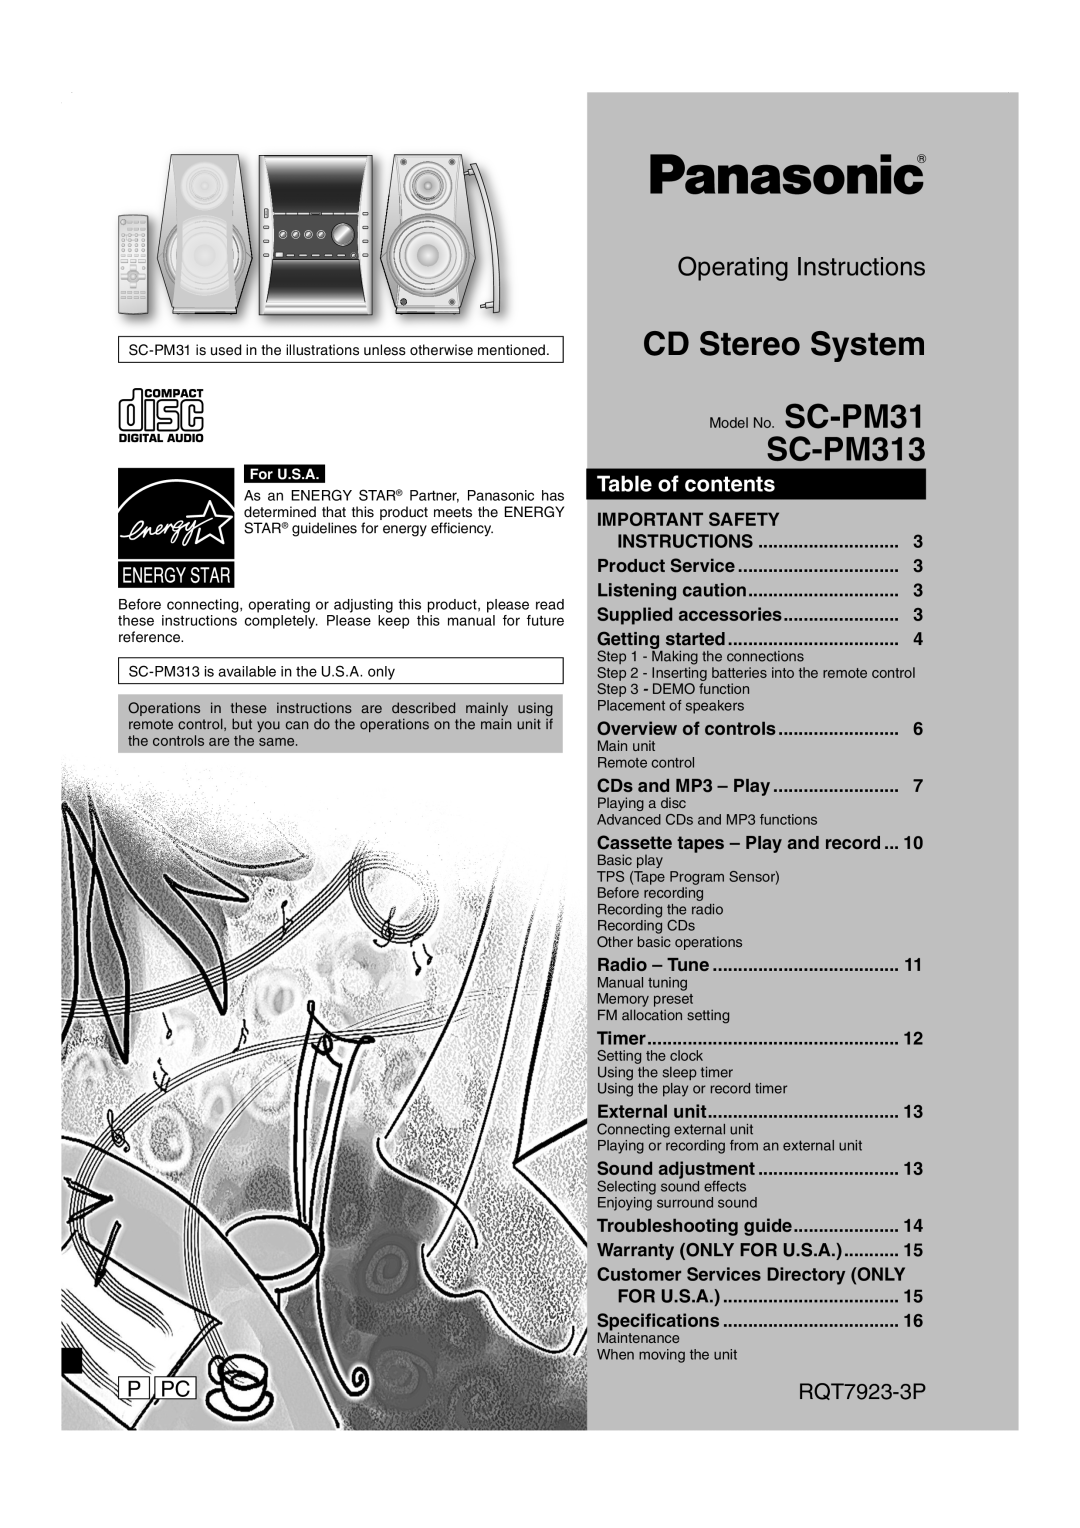 Panasonic SC-PM313 important safety instructions P Pc, Table of contents, RQT7923-3P, Important Safety, CD Stereo System 